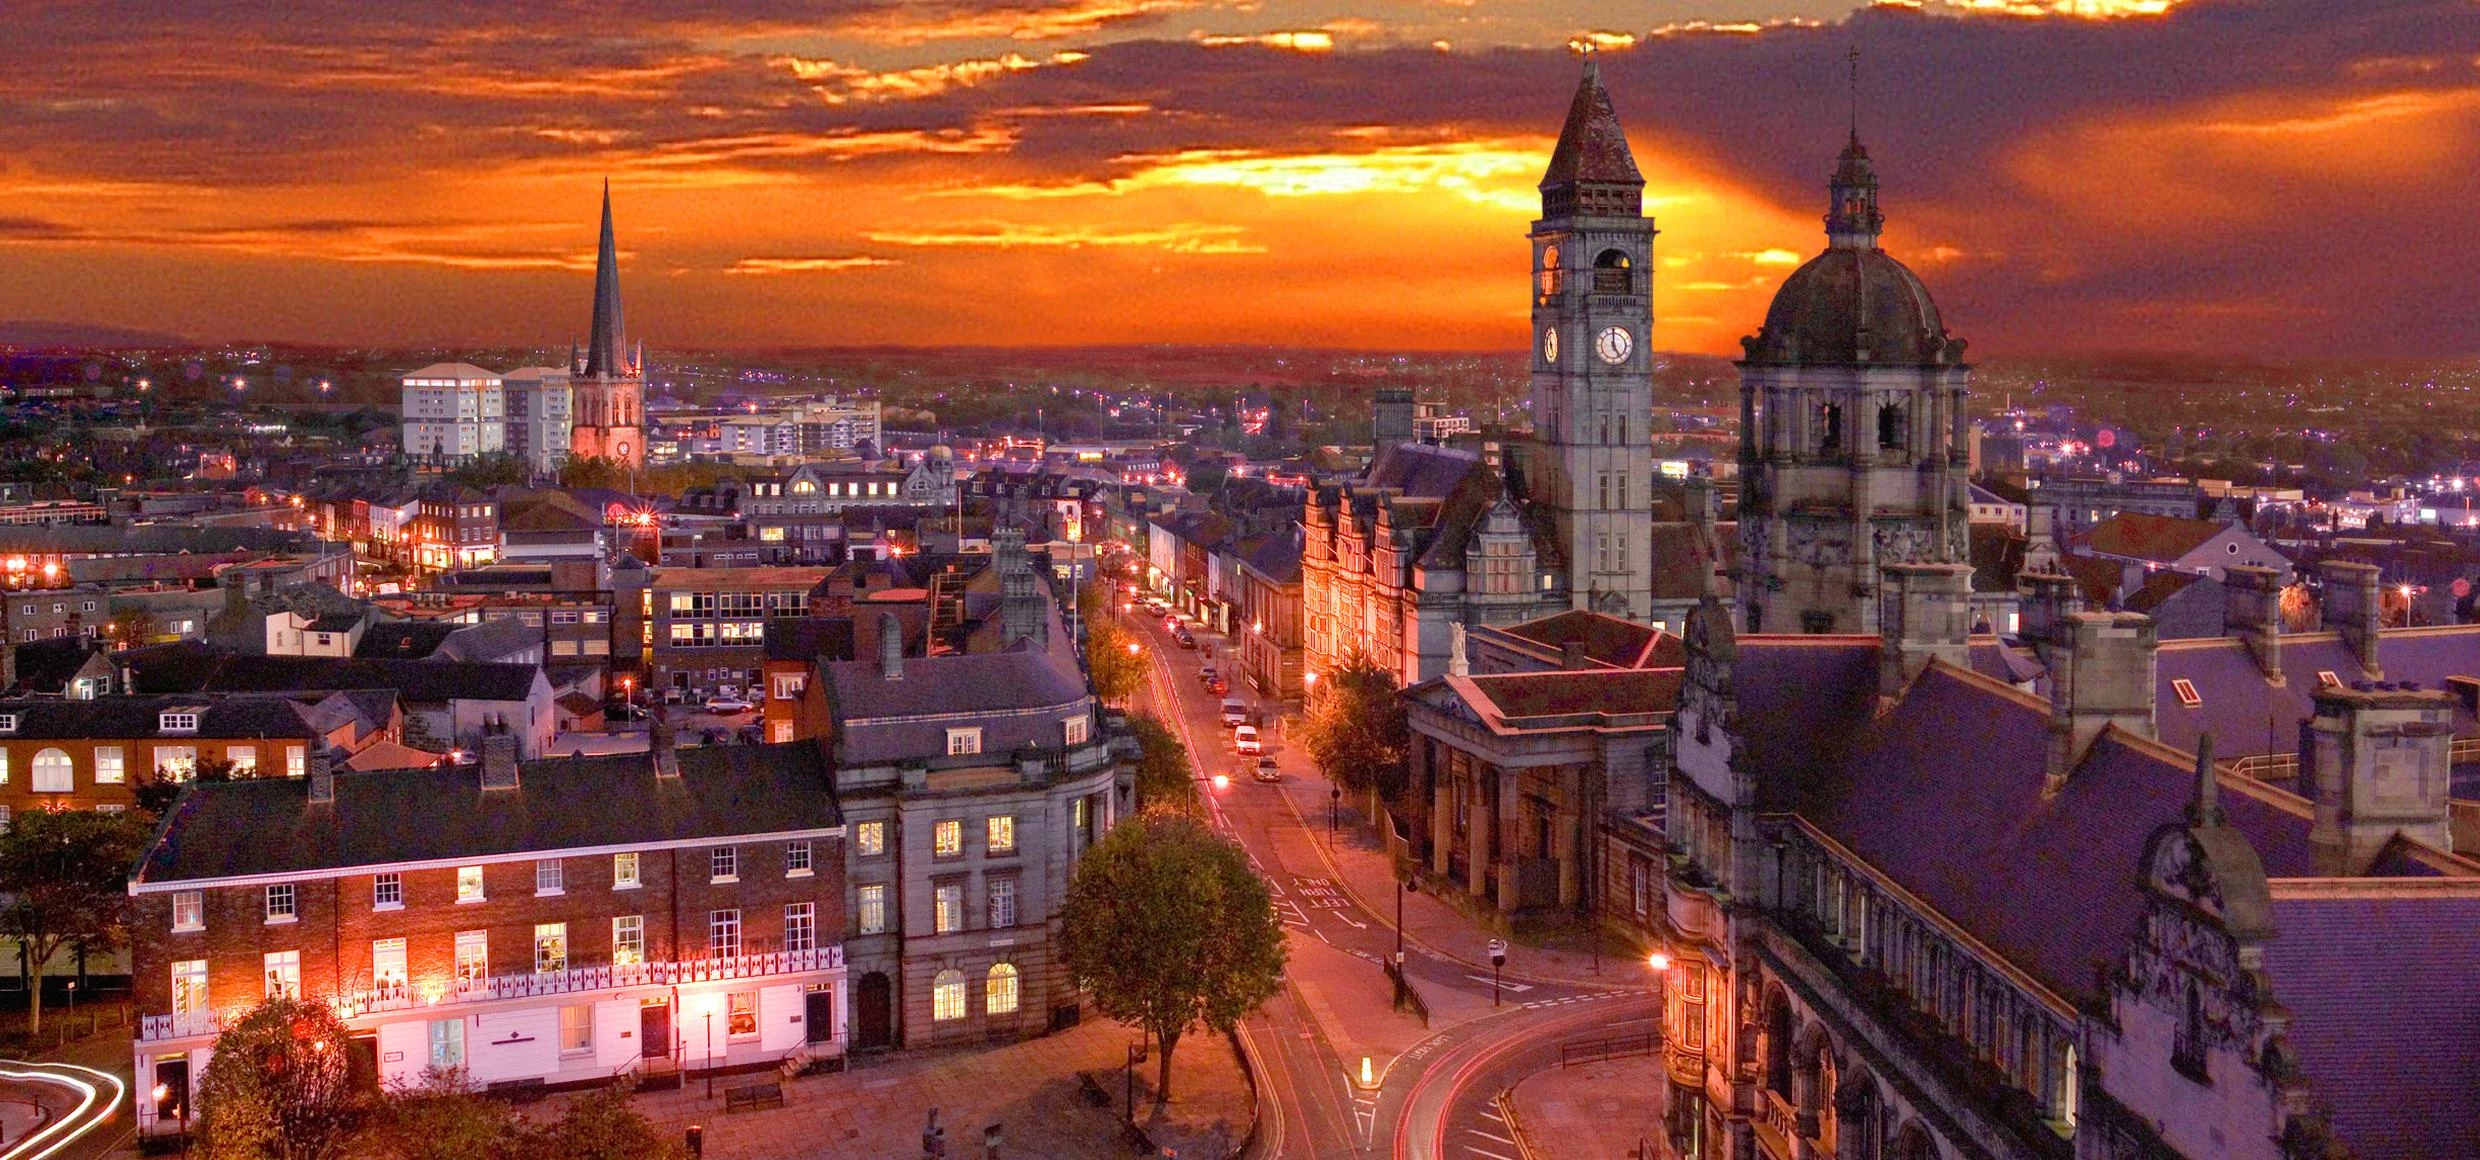 Cultural destinations funding awarded for Wakefield 